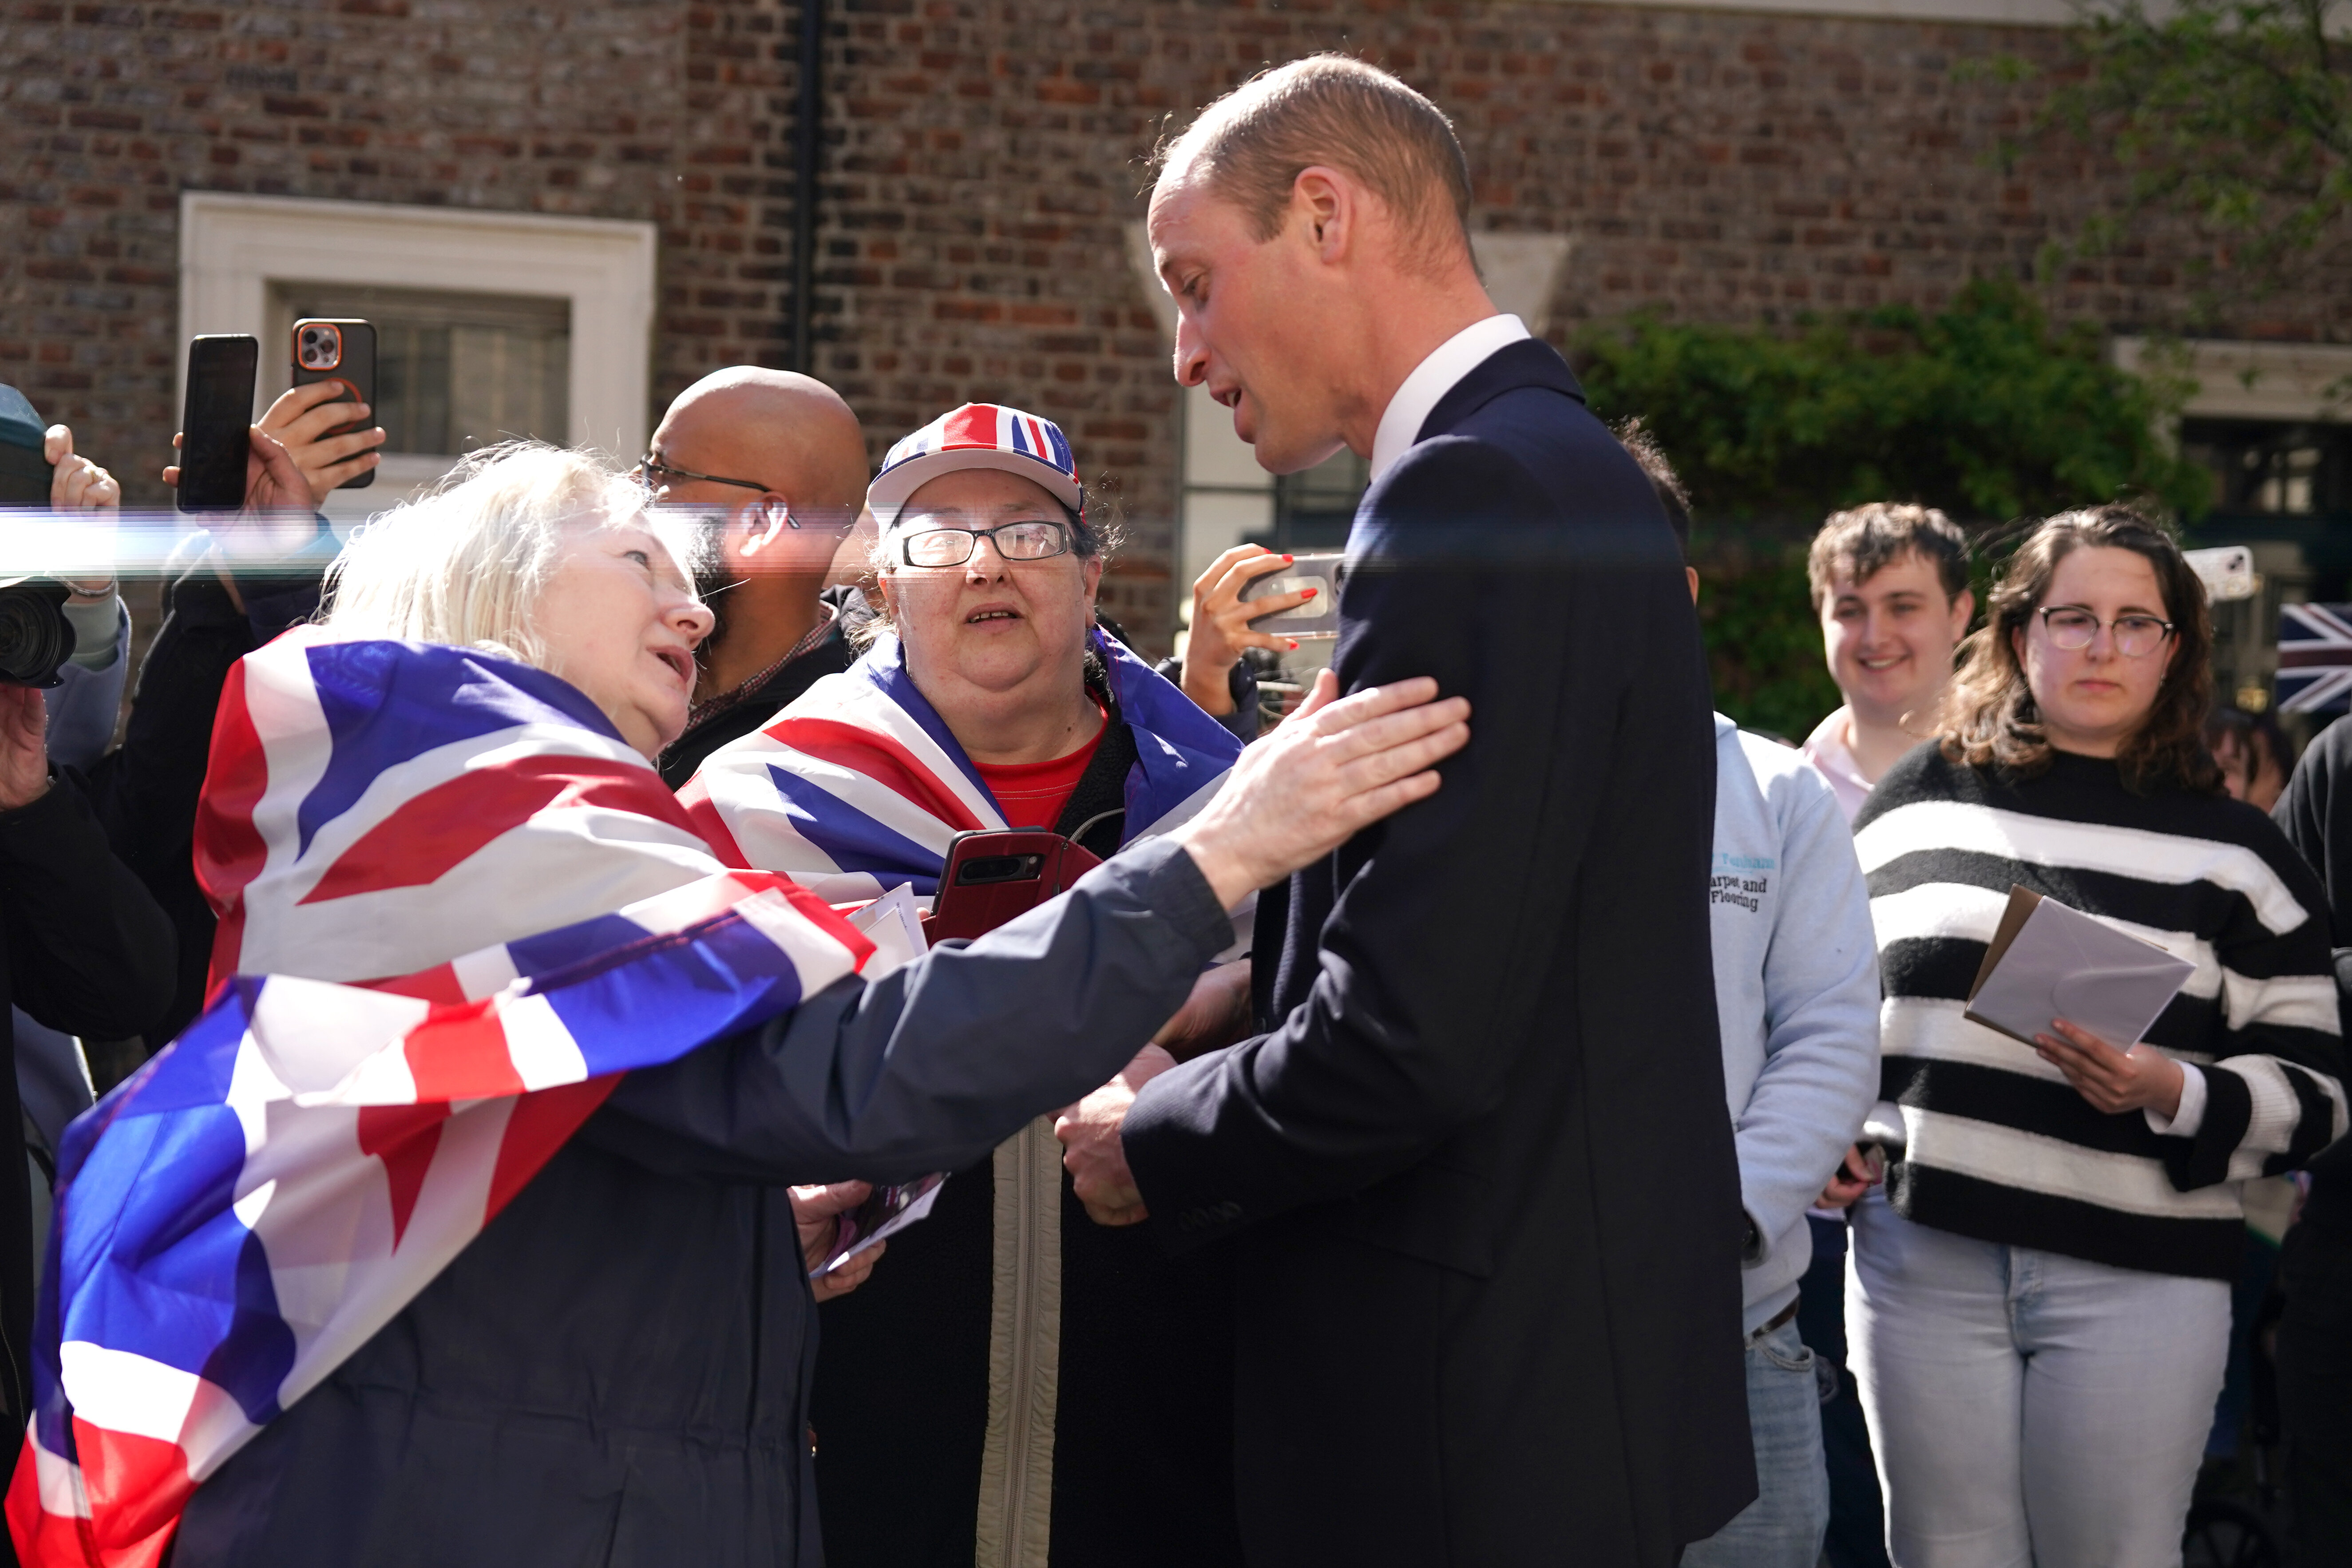 Prince William engages with a cheering crowd, people taking photos; a woman in a Union Jack scarf directly interacts with him